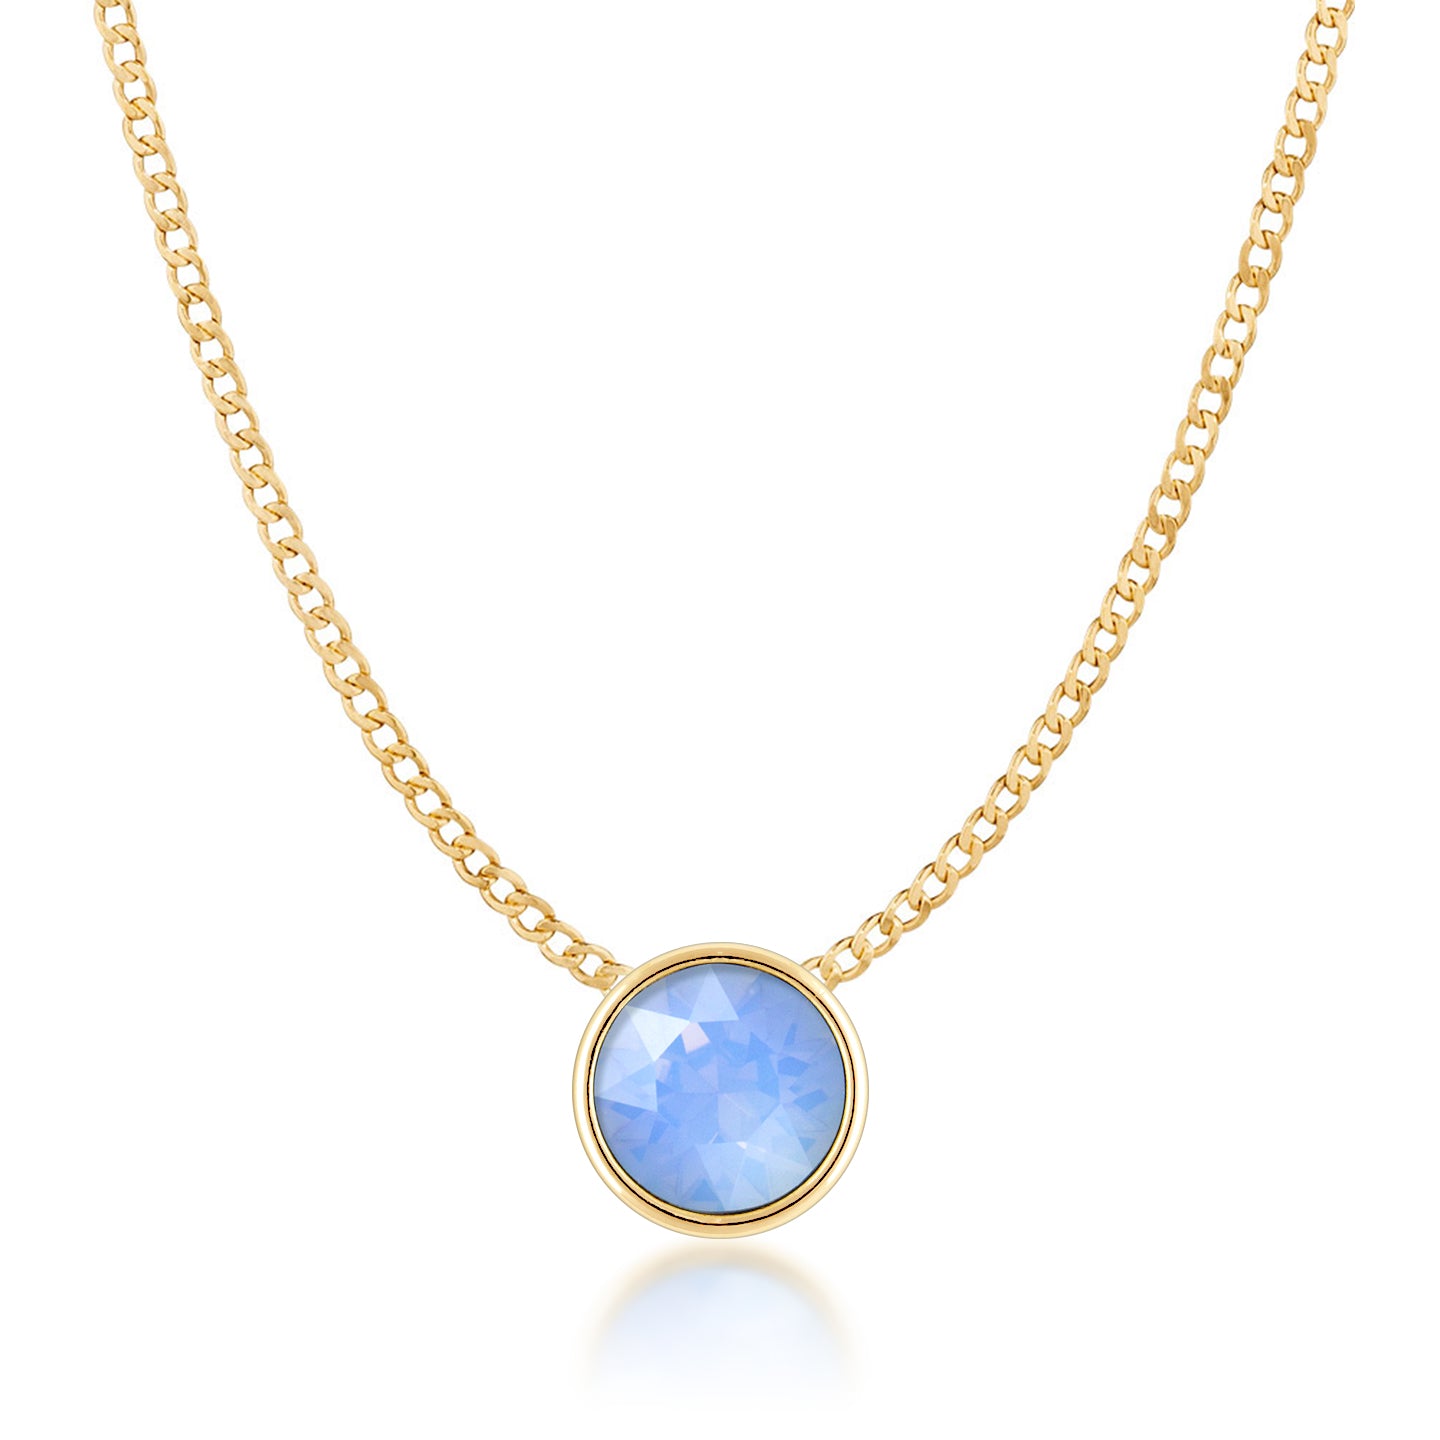 Harley Small Pendant Necklace with Air Blue Round Opals from Swarovski Gold Plated - Ed Heart